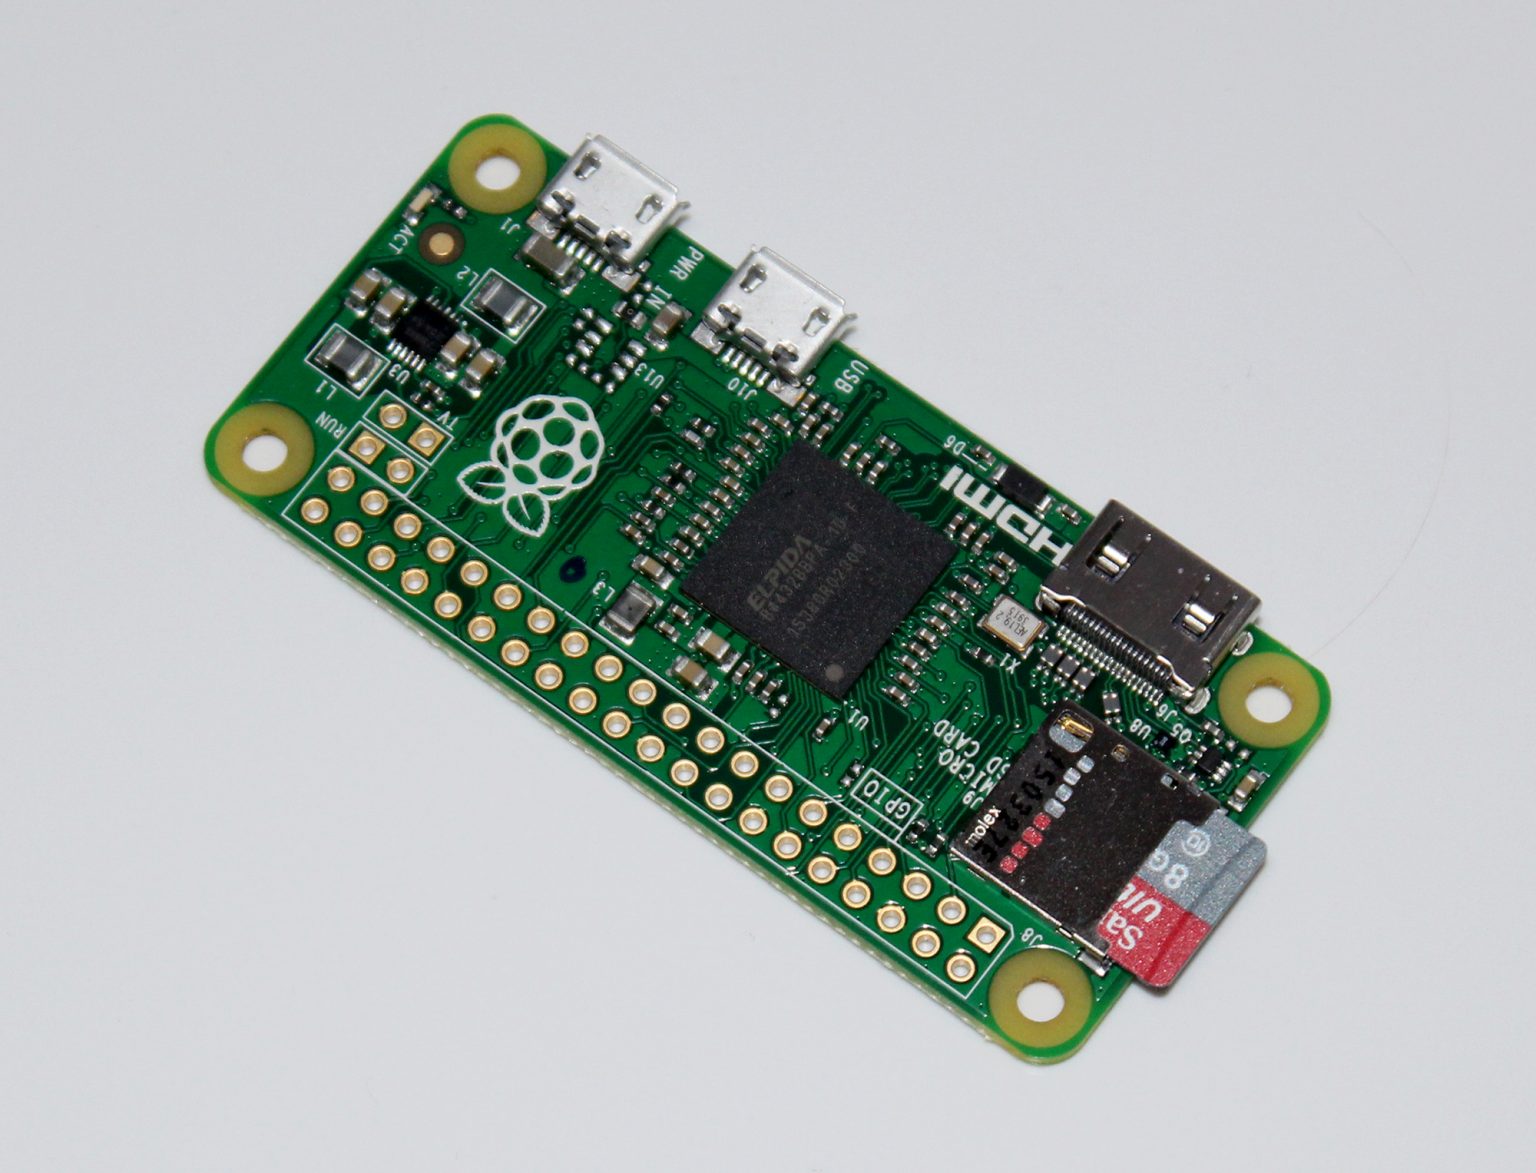 Raspberry Pi Zero gains a mysterious new feature, and improved availability